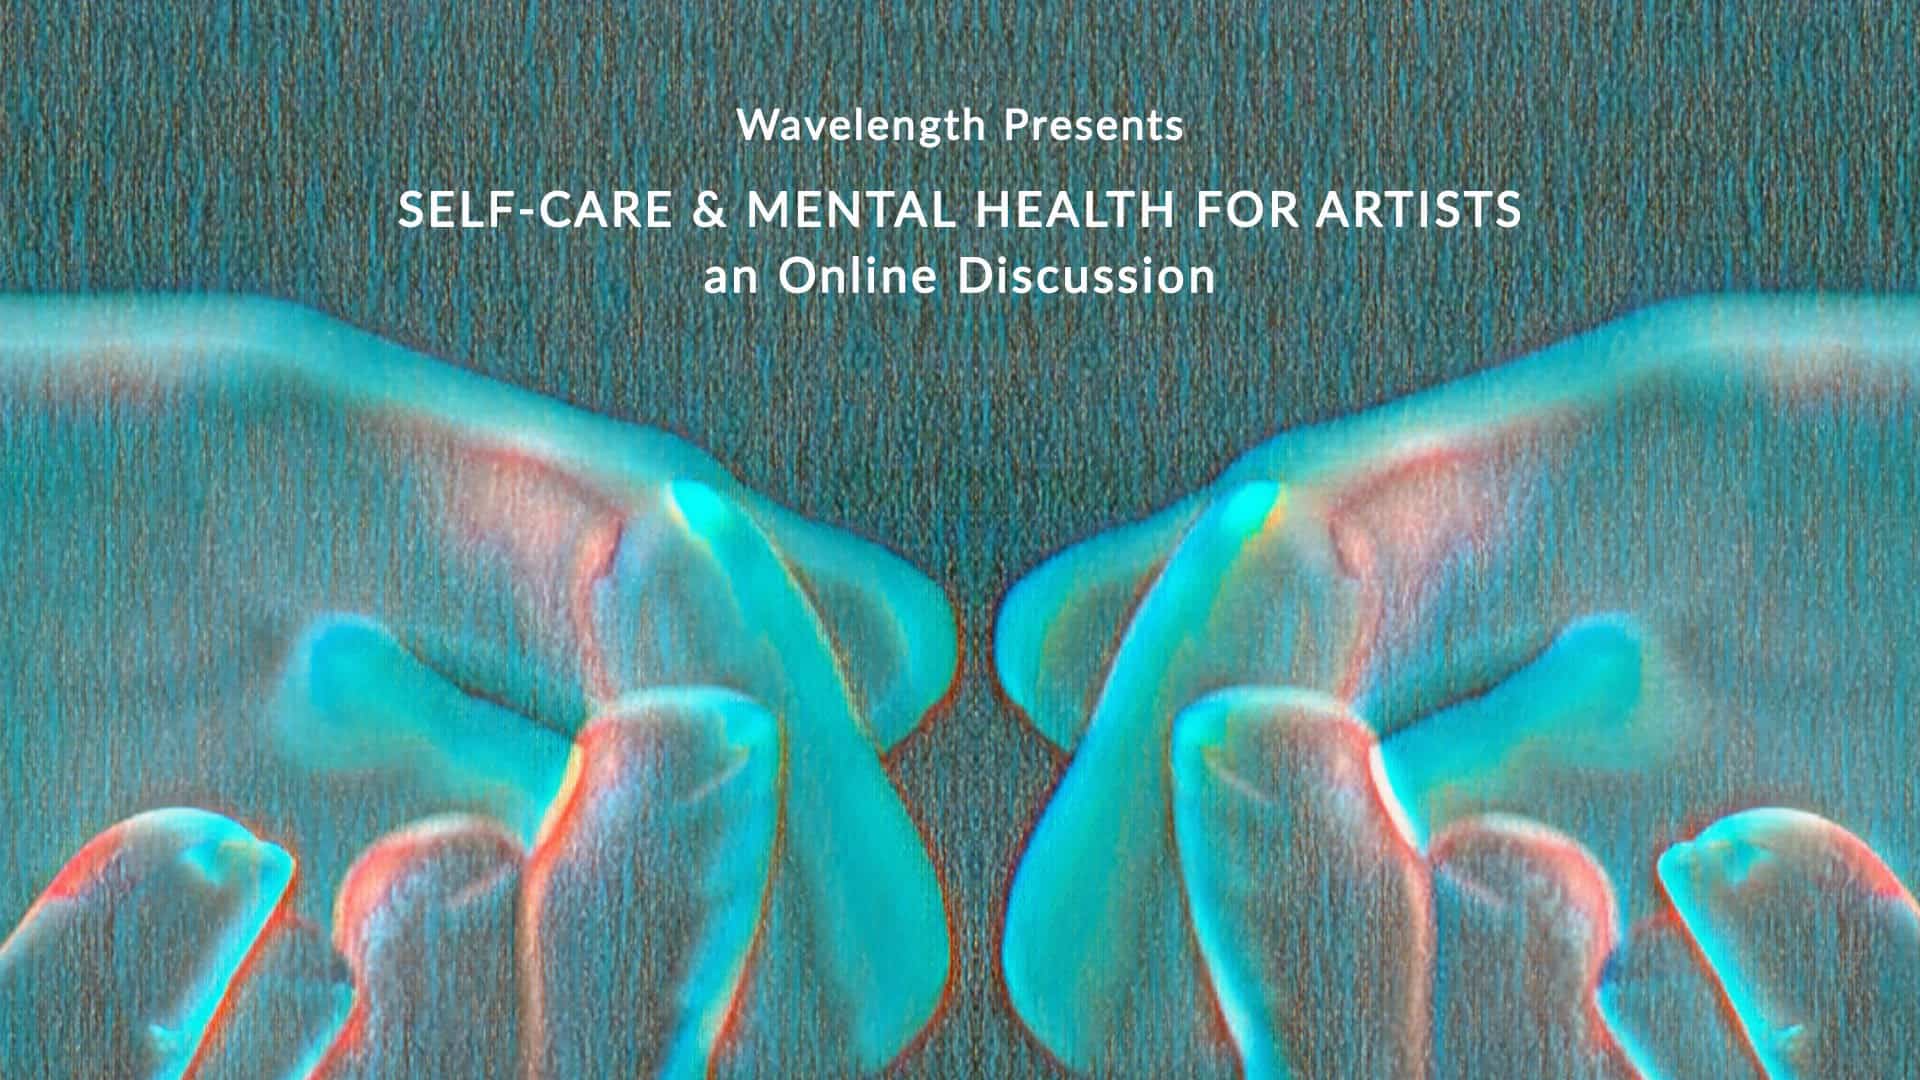 Wavelength Festival Hosts A Self Care And Mental Health Discussion For